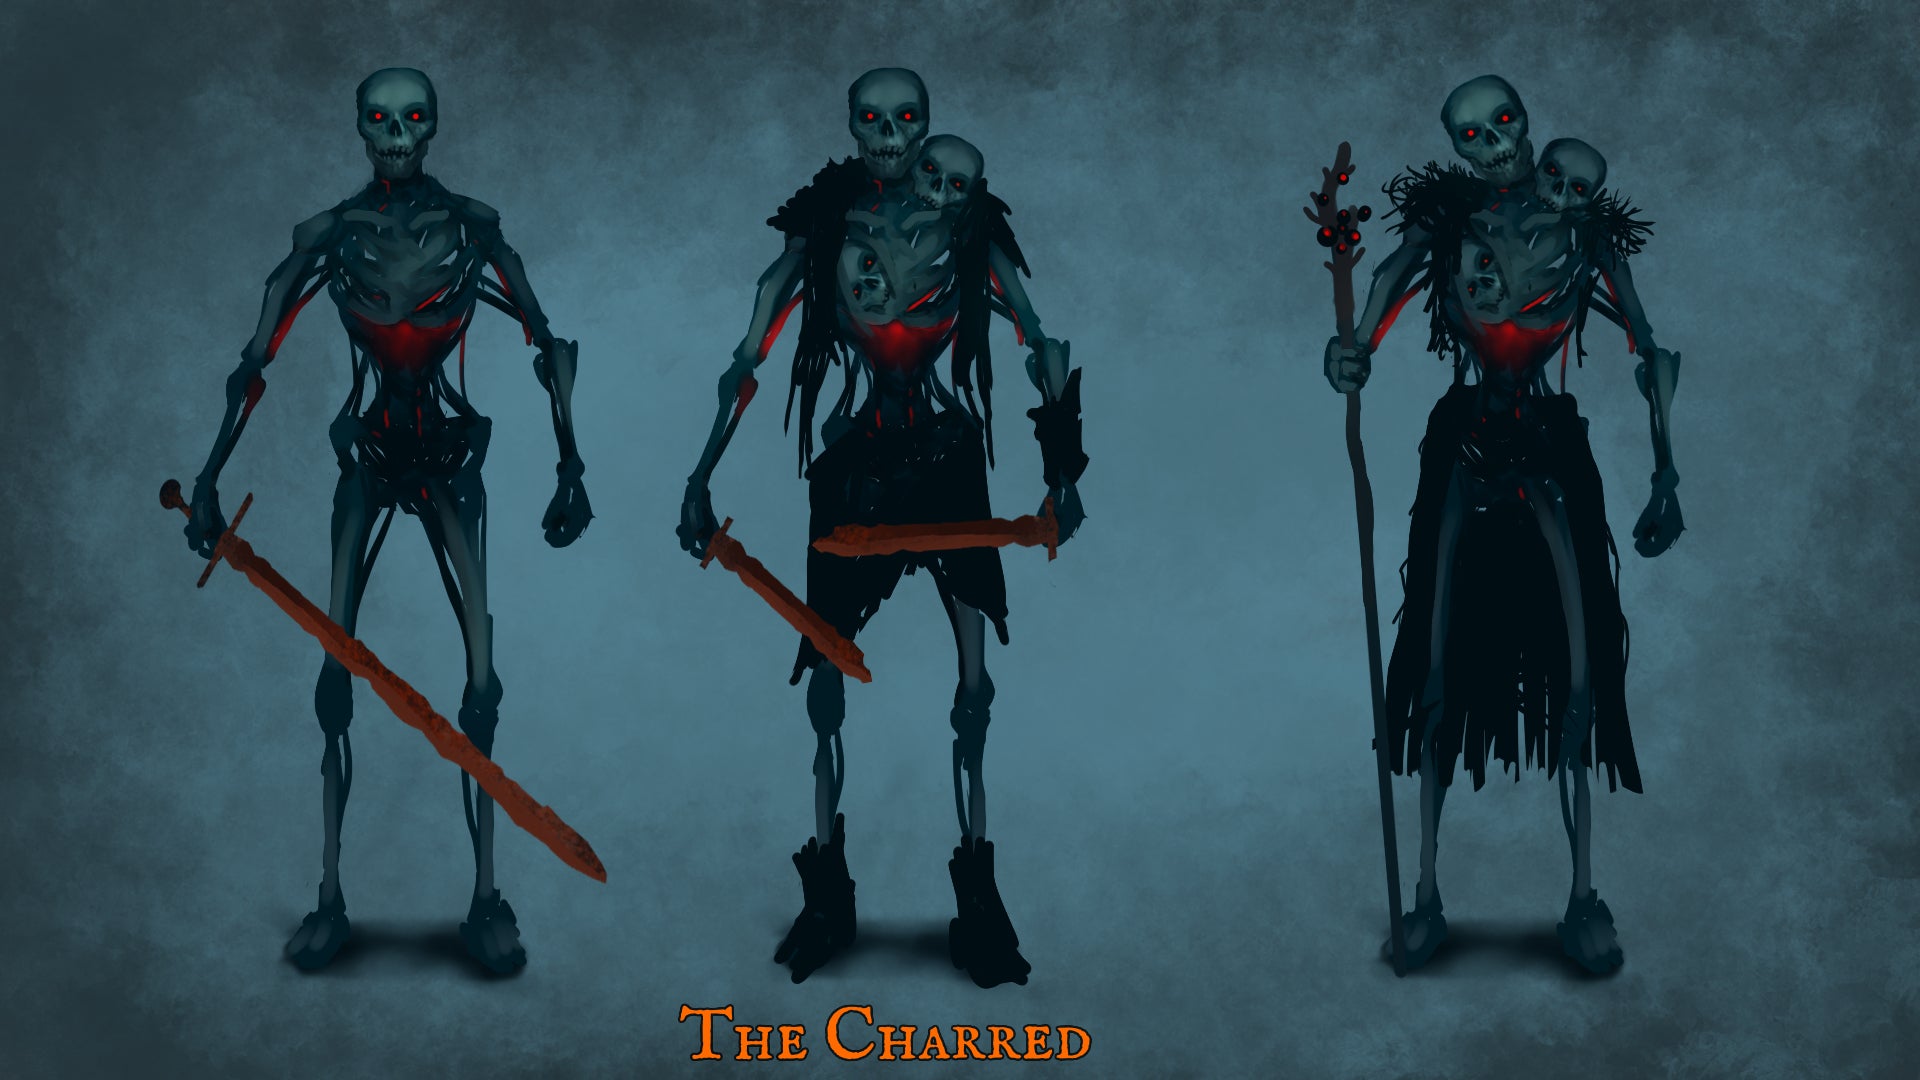 Concept art for 'The Charred' enemies in Valheim's Ashlands update